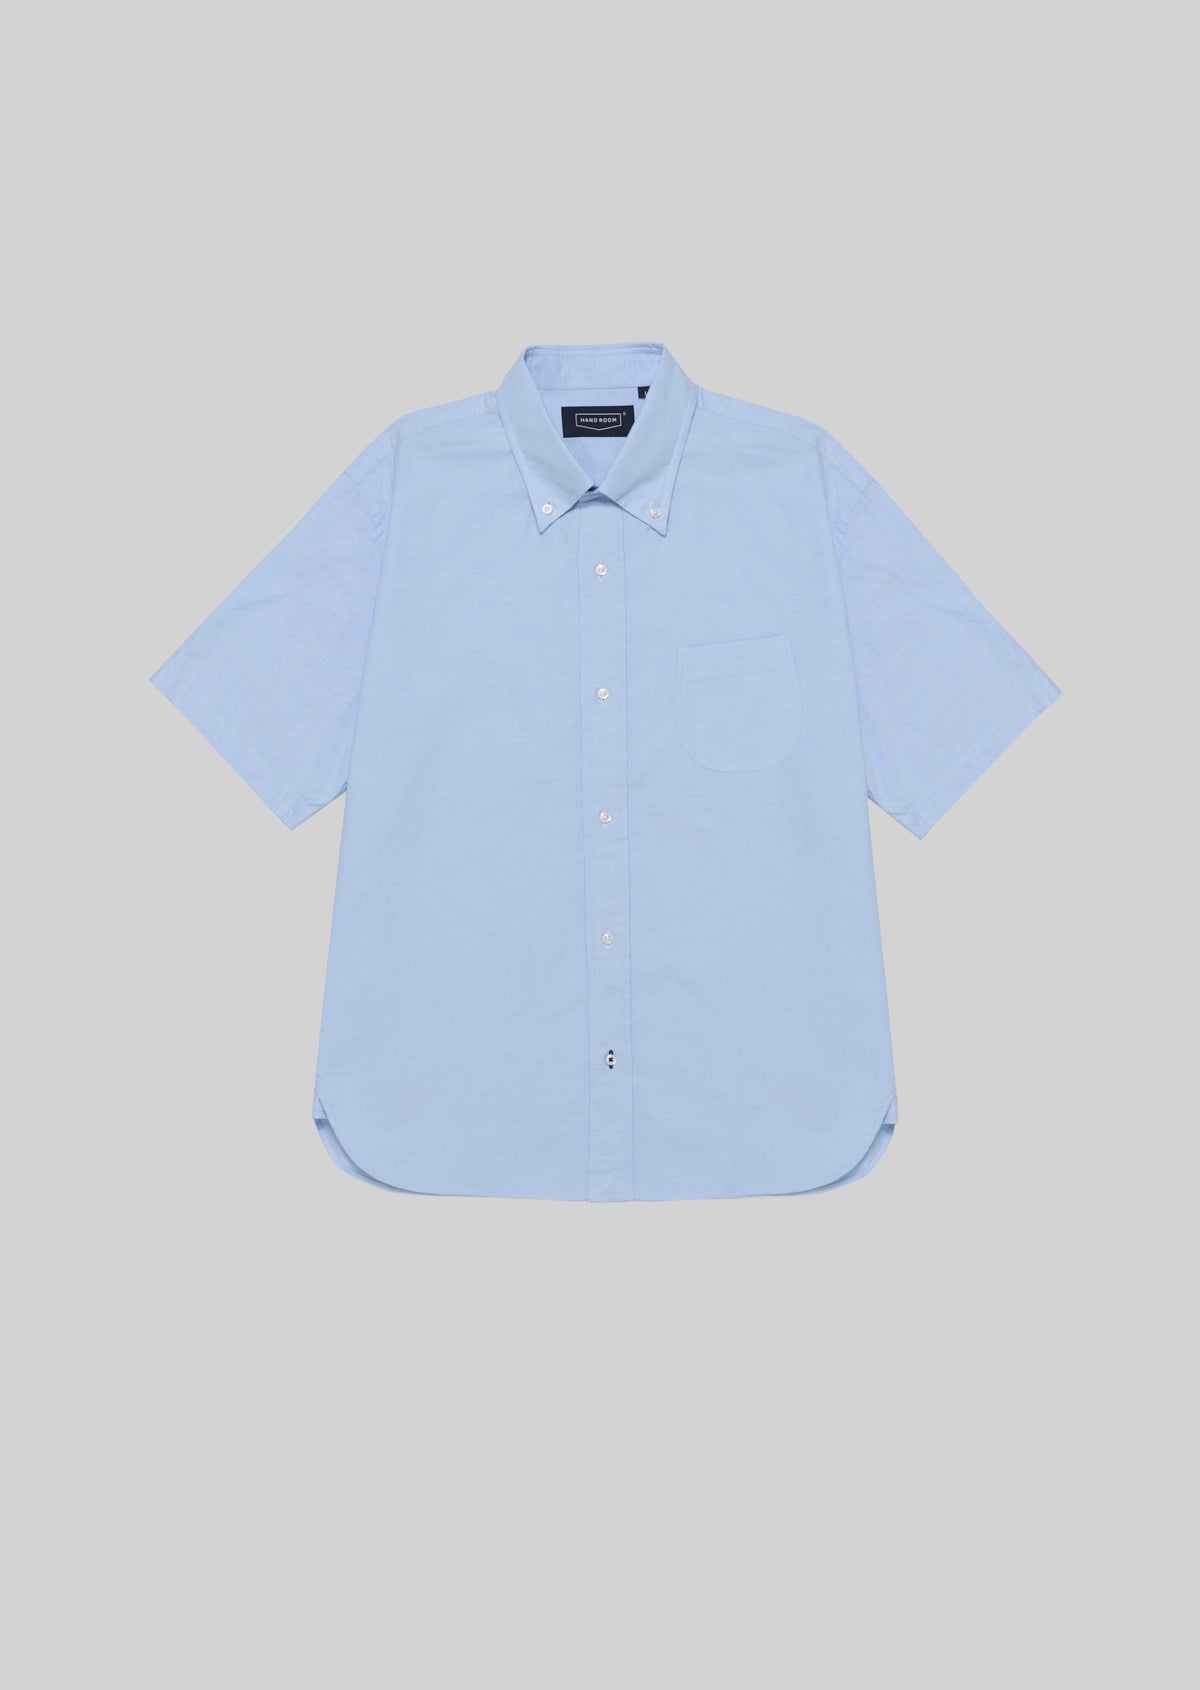 OX FORD BUTTON DOWN SHORT SLEEVE SHIRTS BLUE 8031-1603